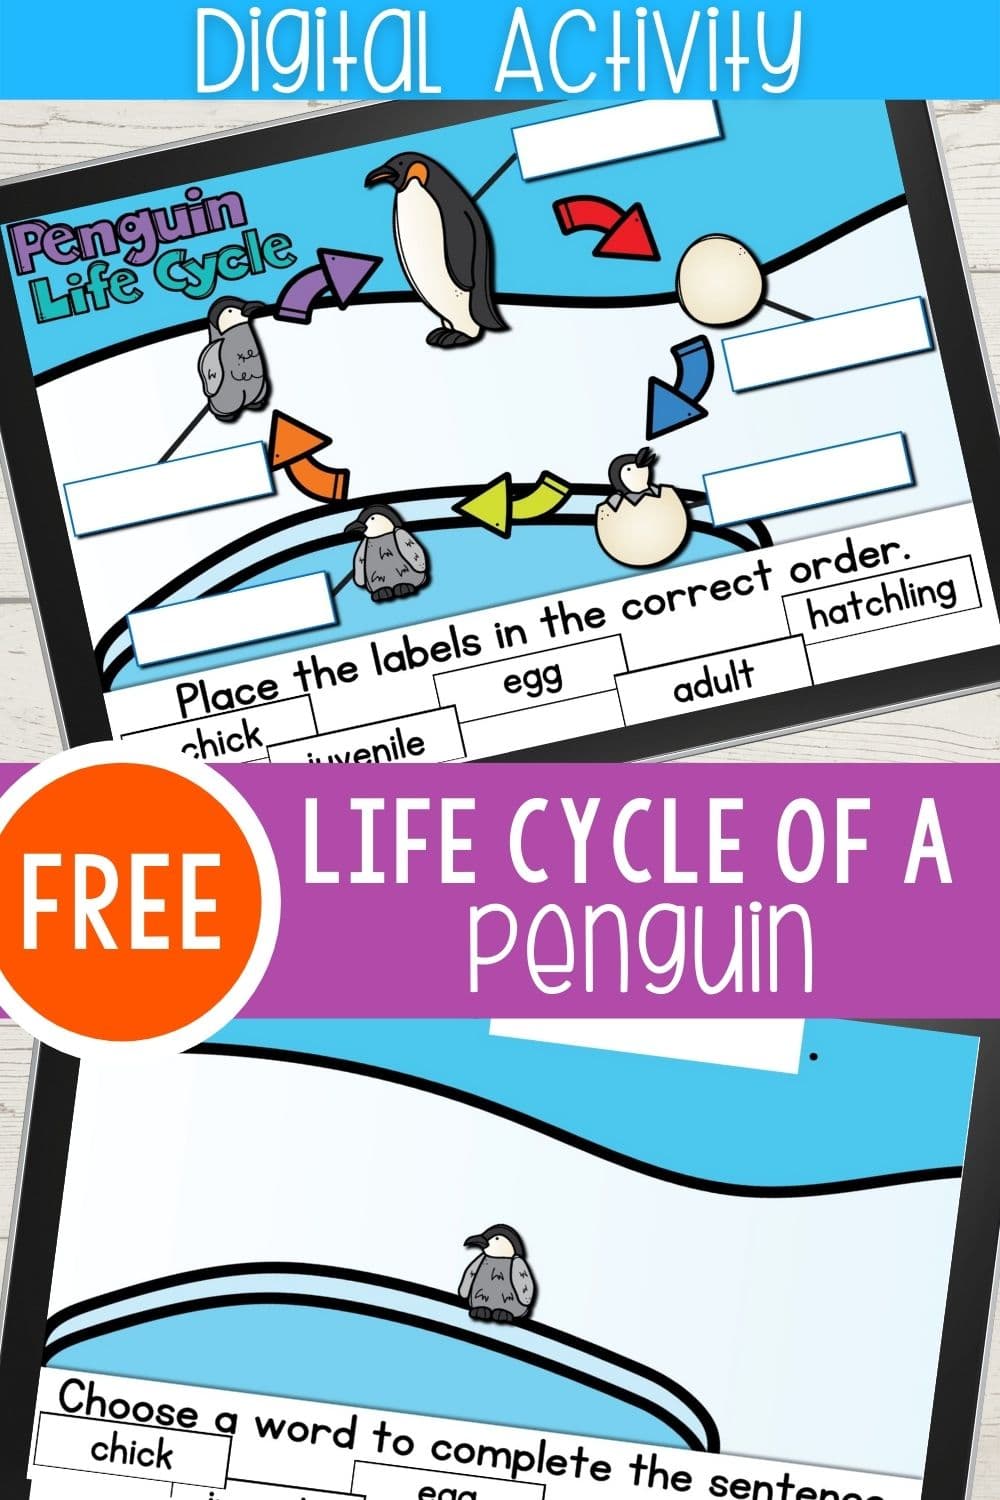 Free Life Cycle of a Penguin Digital Activity